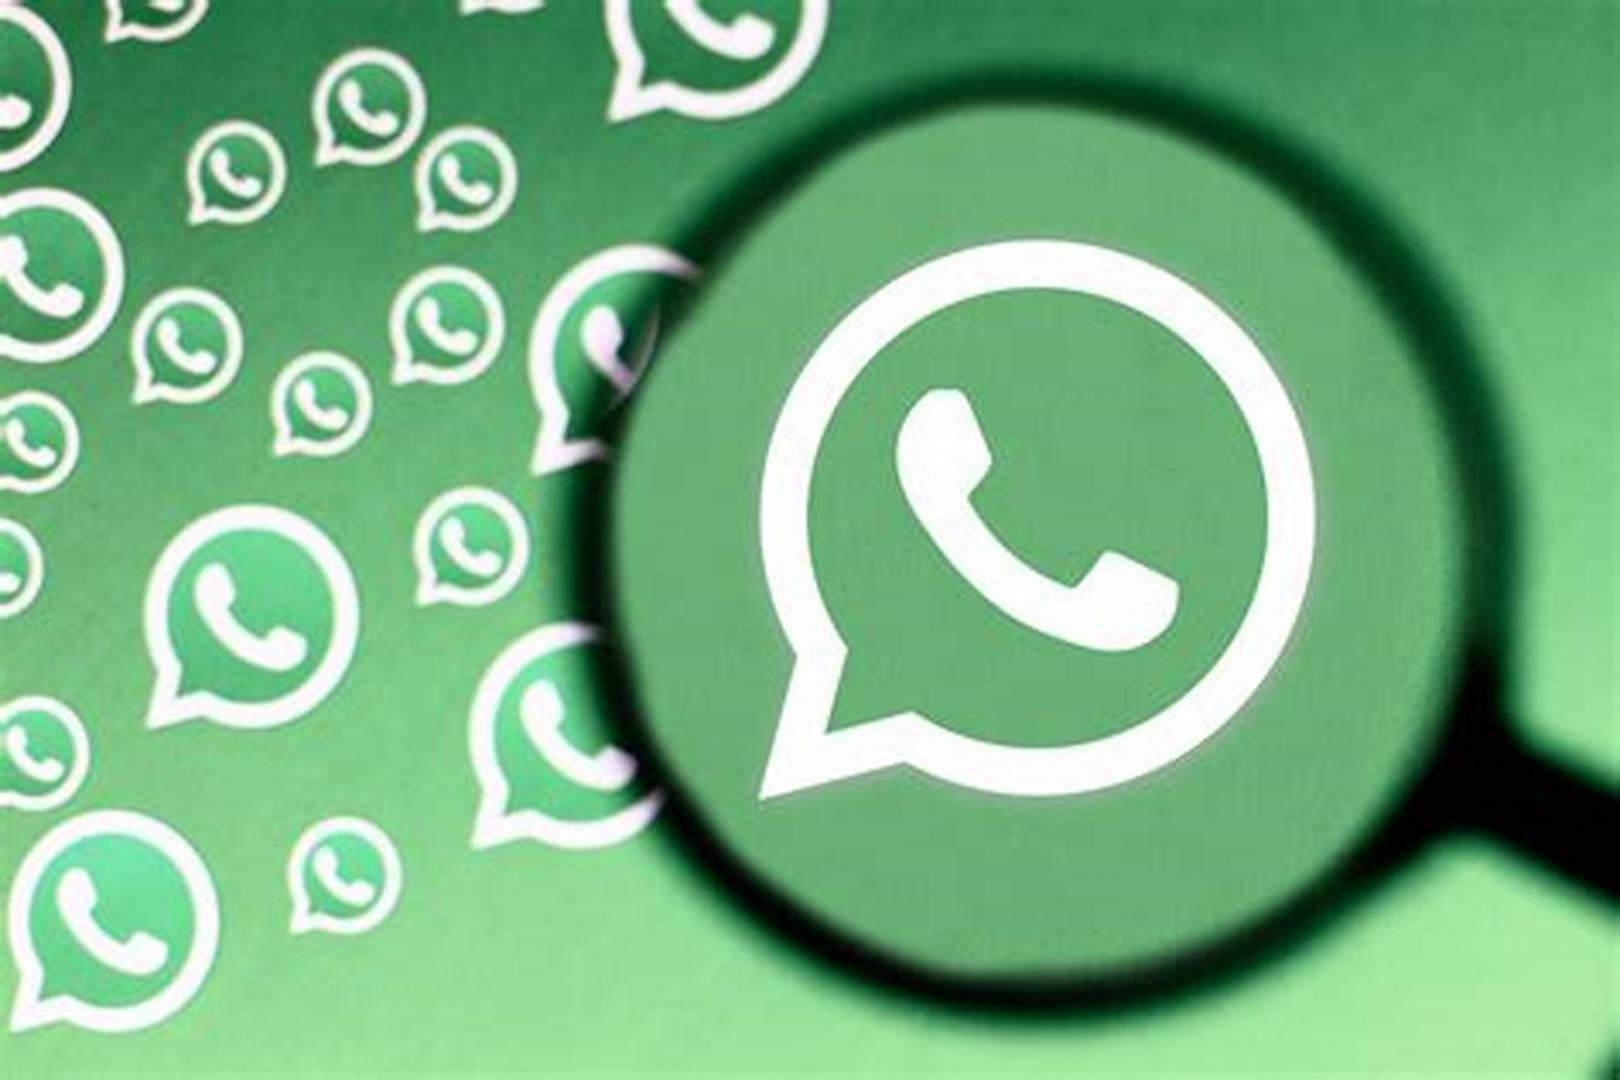 WhatsApp User Data Collection Software